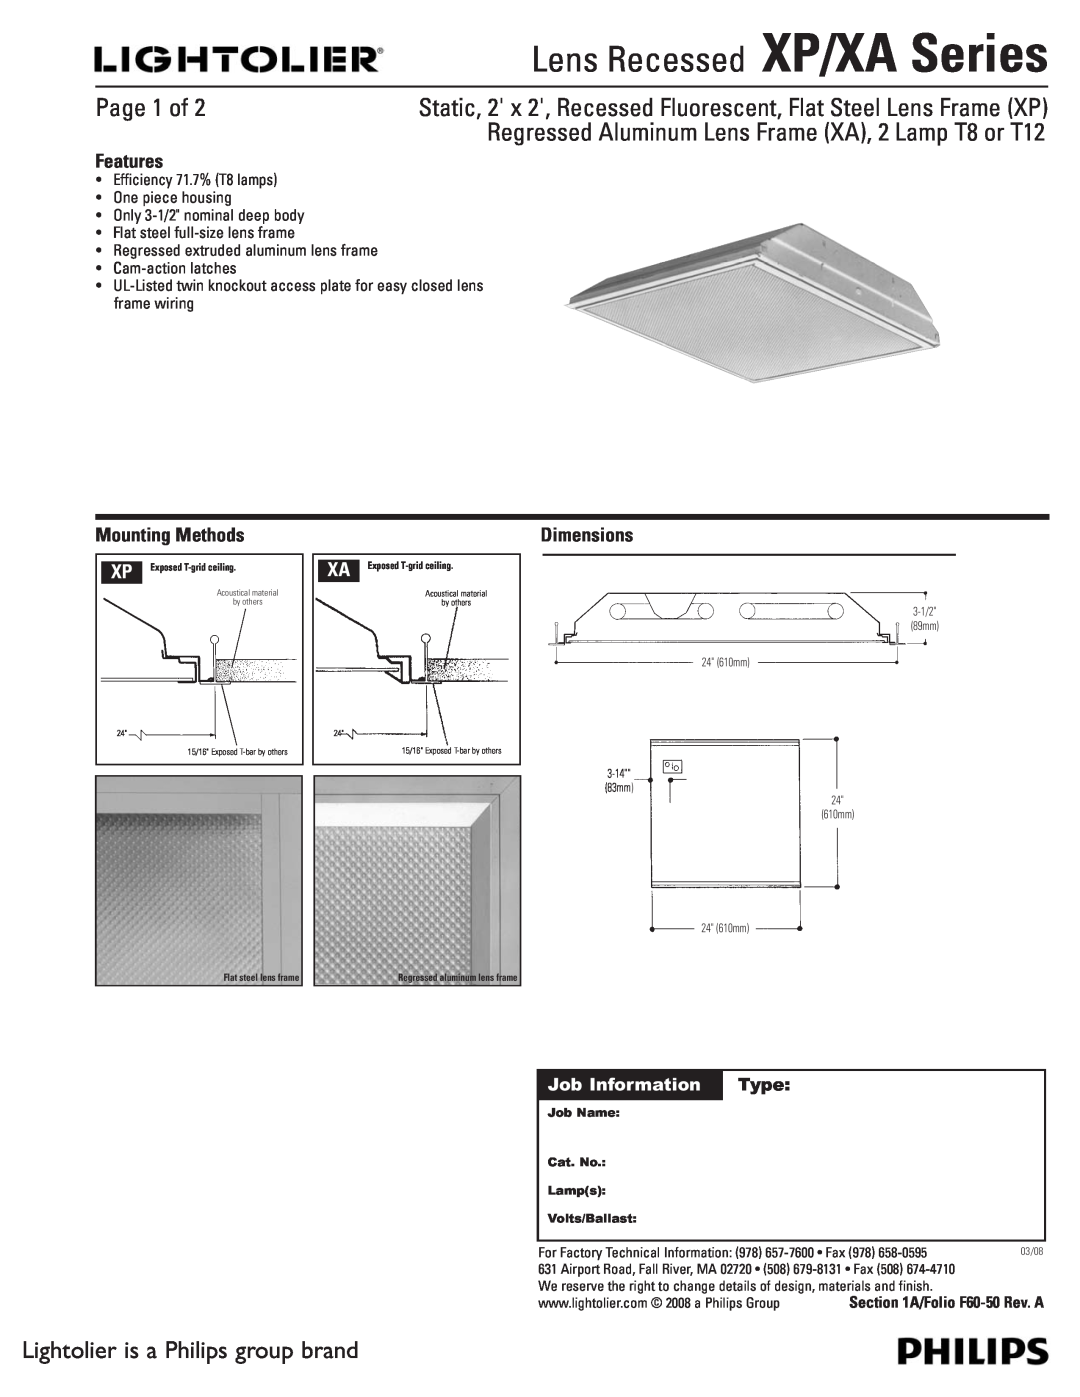 Lightolier dimensions Lens Recessed XP/XA Series, Page 1 of, Lightolier is a Philips group brand, Features, Dimensions 